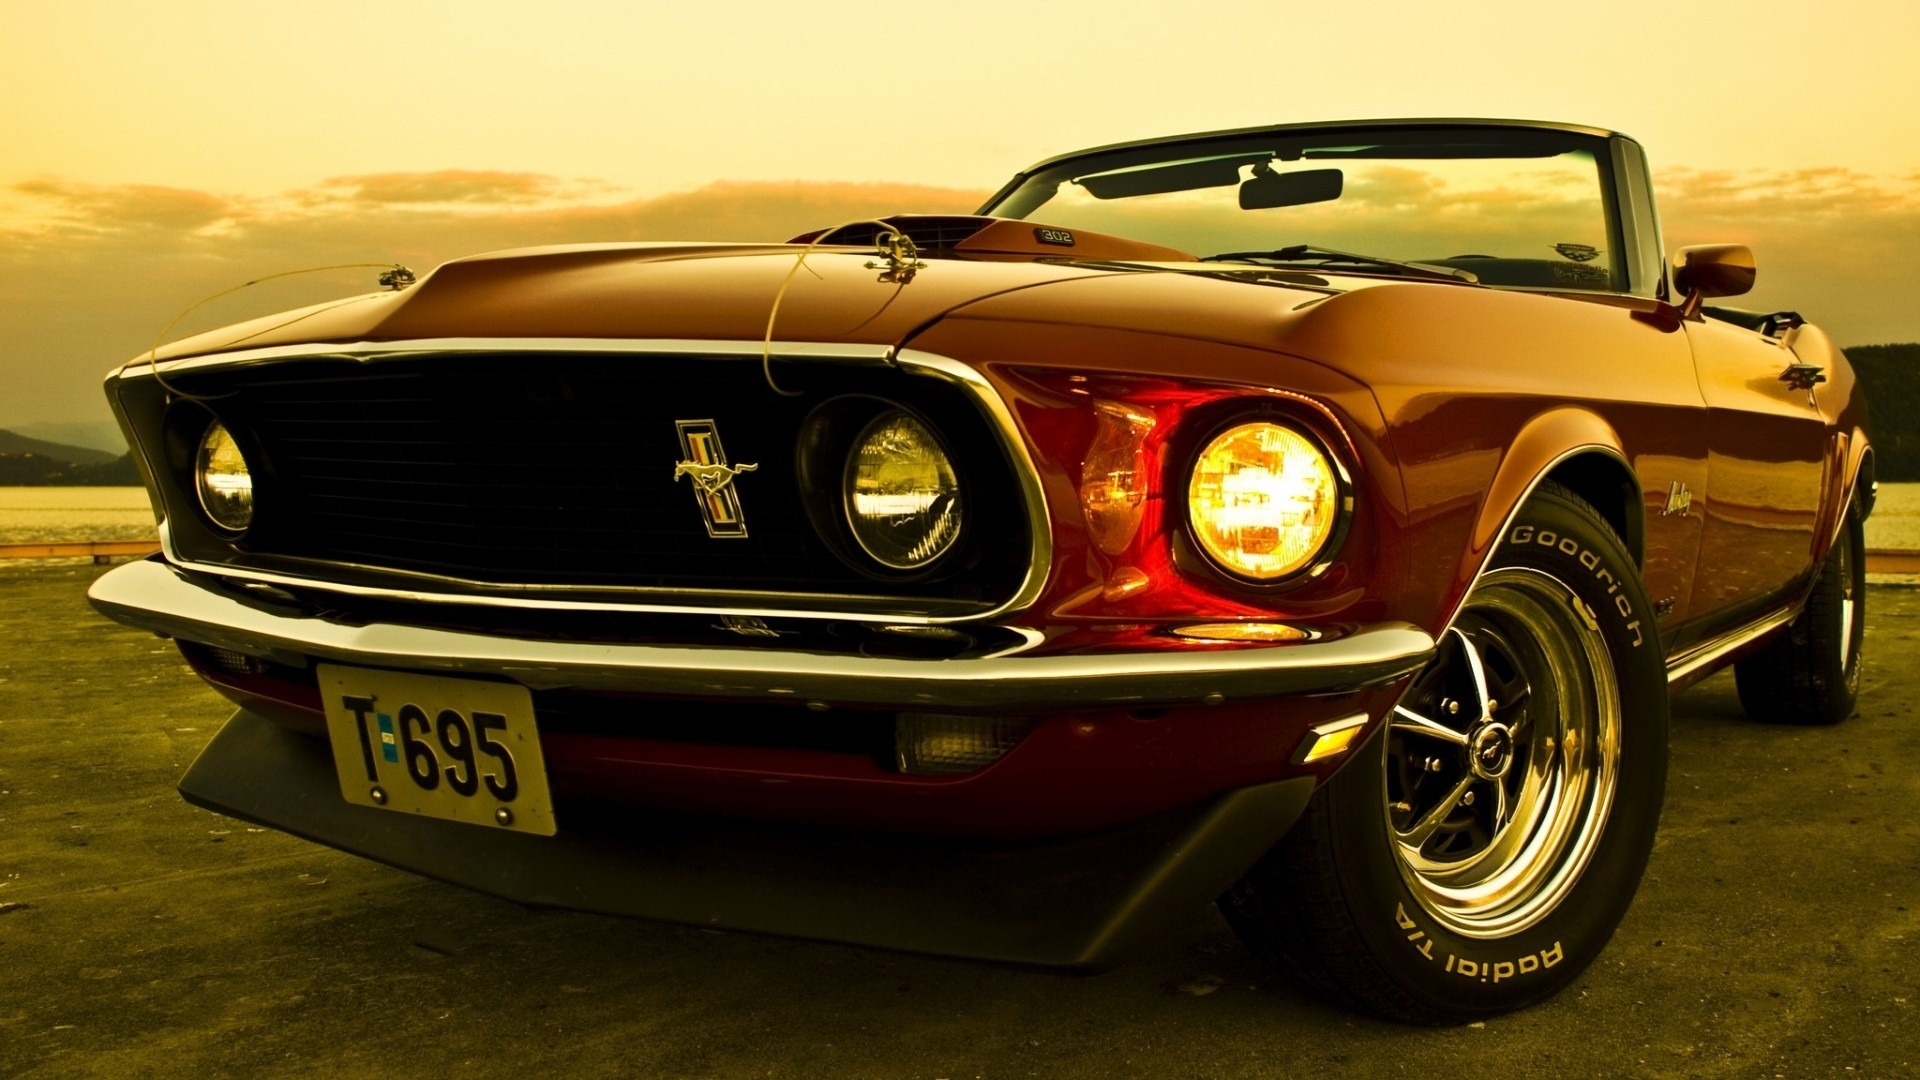 1969 Ford Mustang Convertible for 1920 x 1080 HDTV 1080p resolution